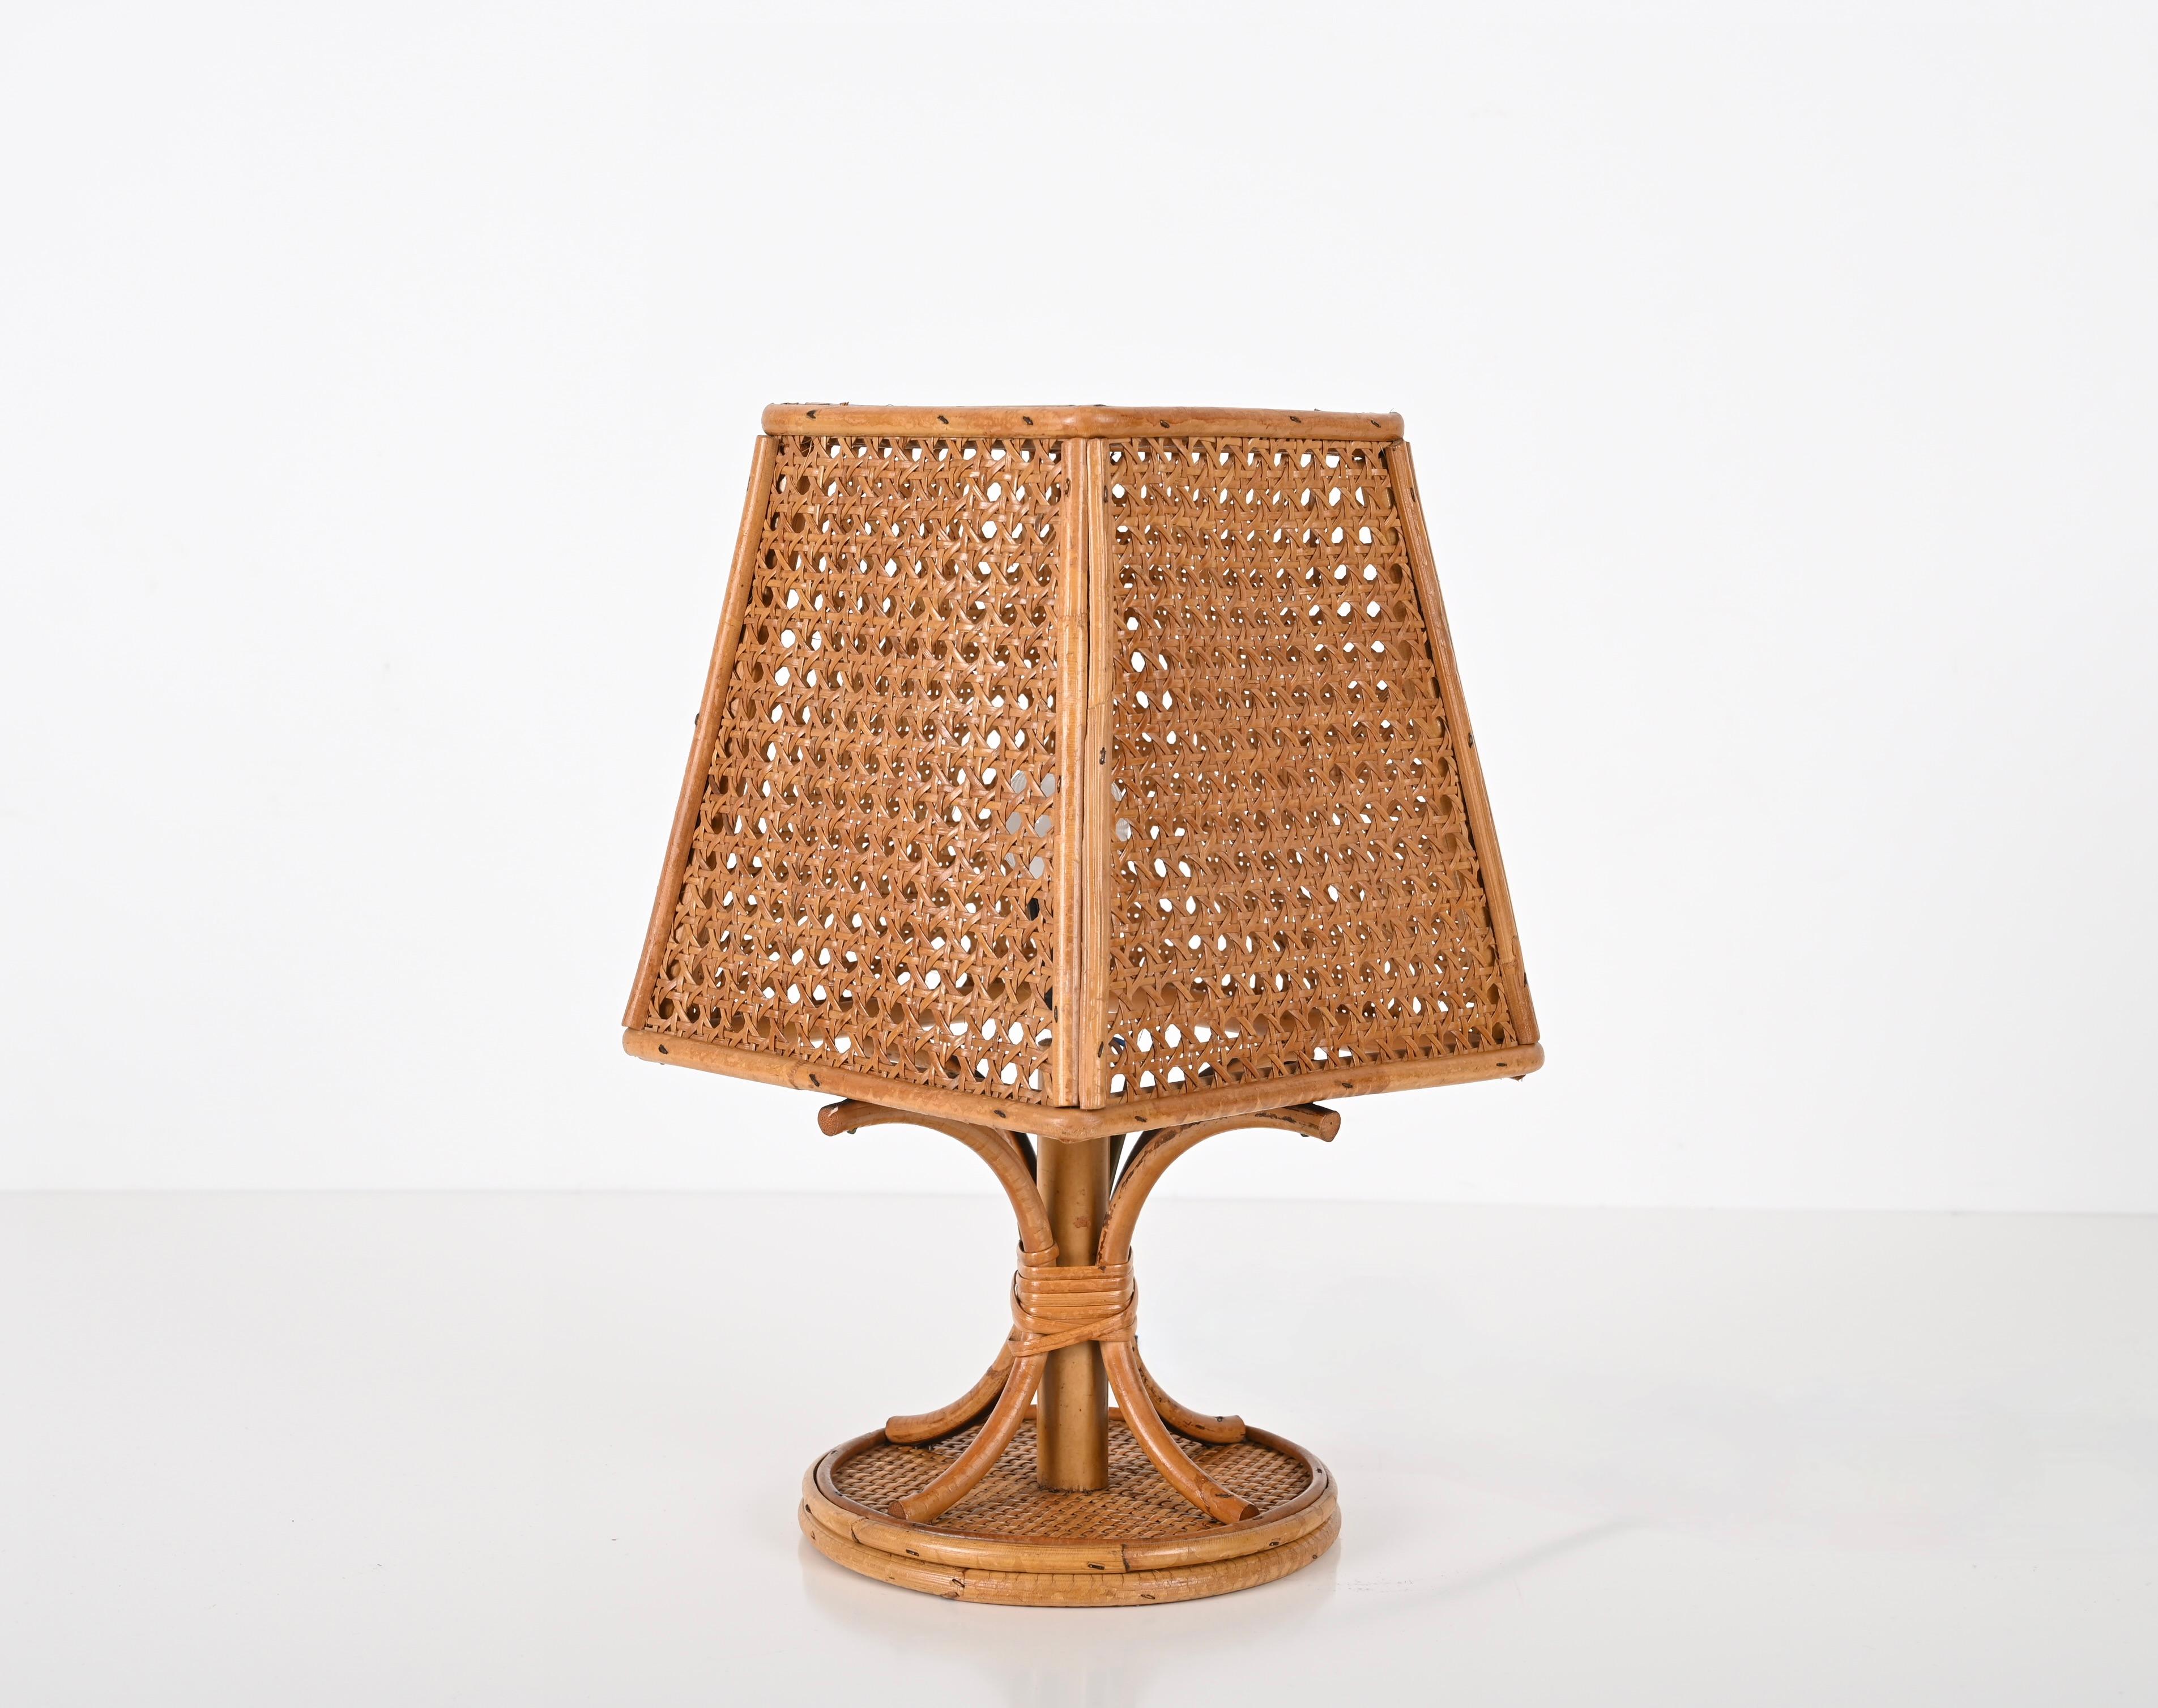 Pair of French Riviera Table Lamps in Wicker and Rattan, Italy 1960s For Sale 6